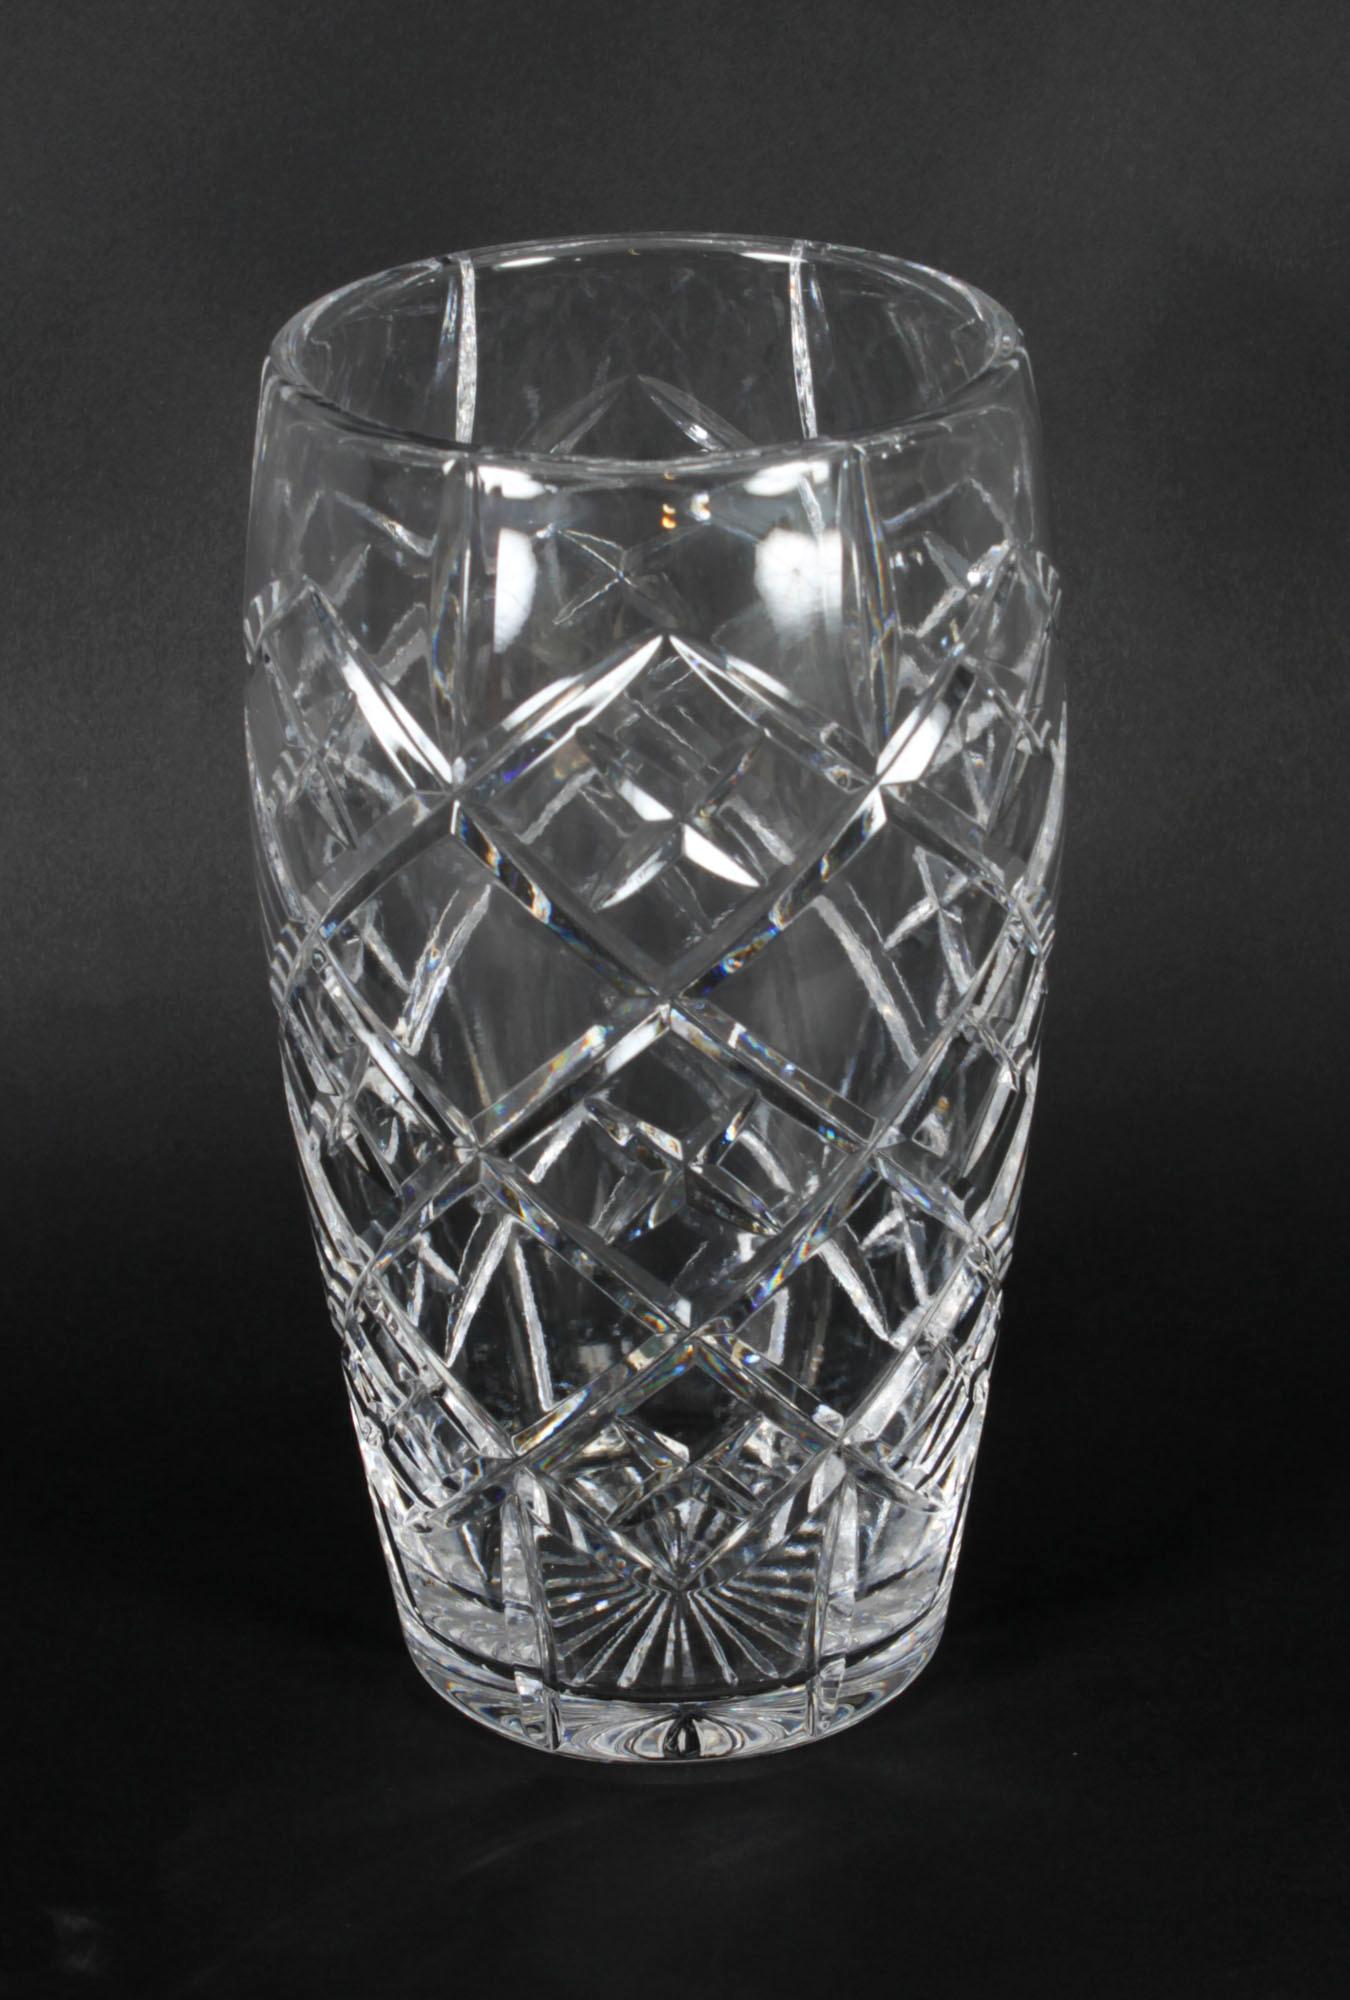 This is a splendid English antique cut crystal vase, circa 1900 in date.
 
This wonderful cylindrical vase is ideal for almost any floral arrangement, while the vase itself boasts stability and comforting weight. It features beautiful relief